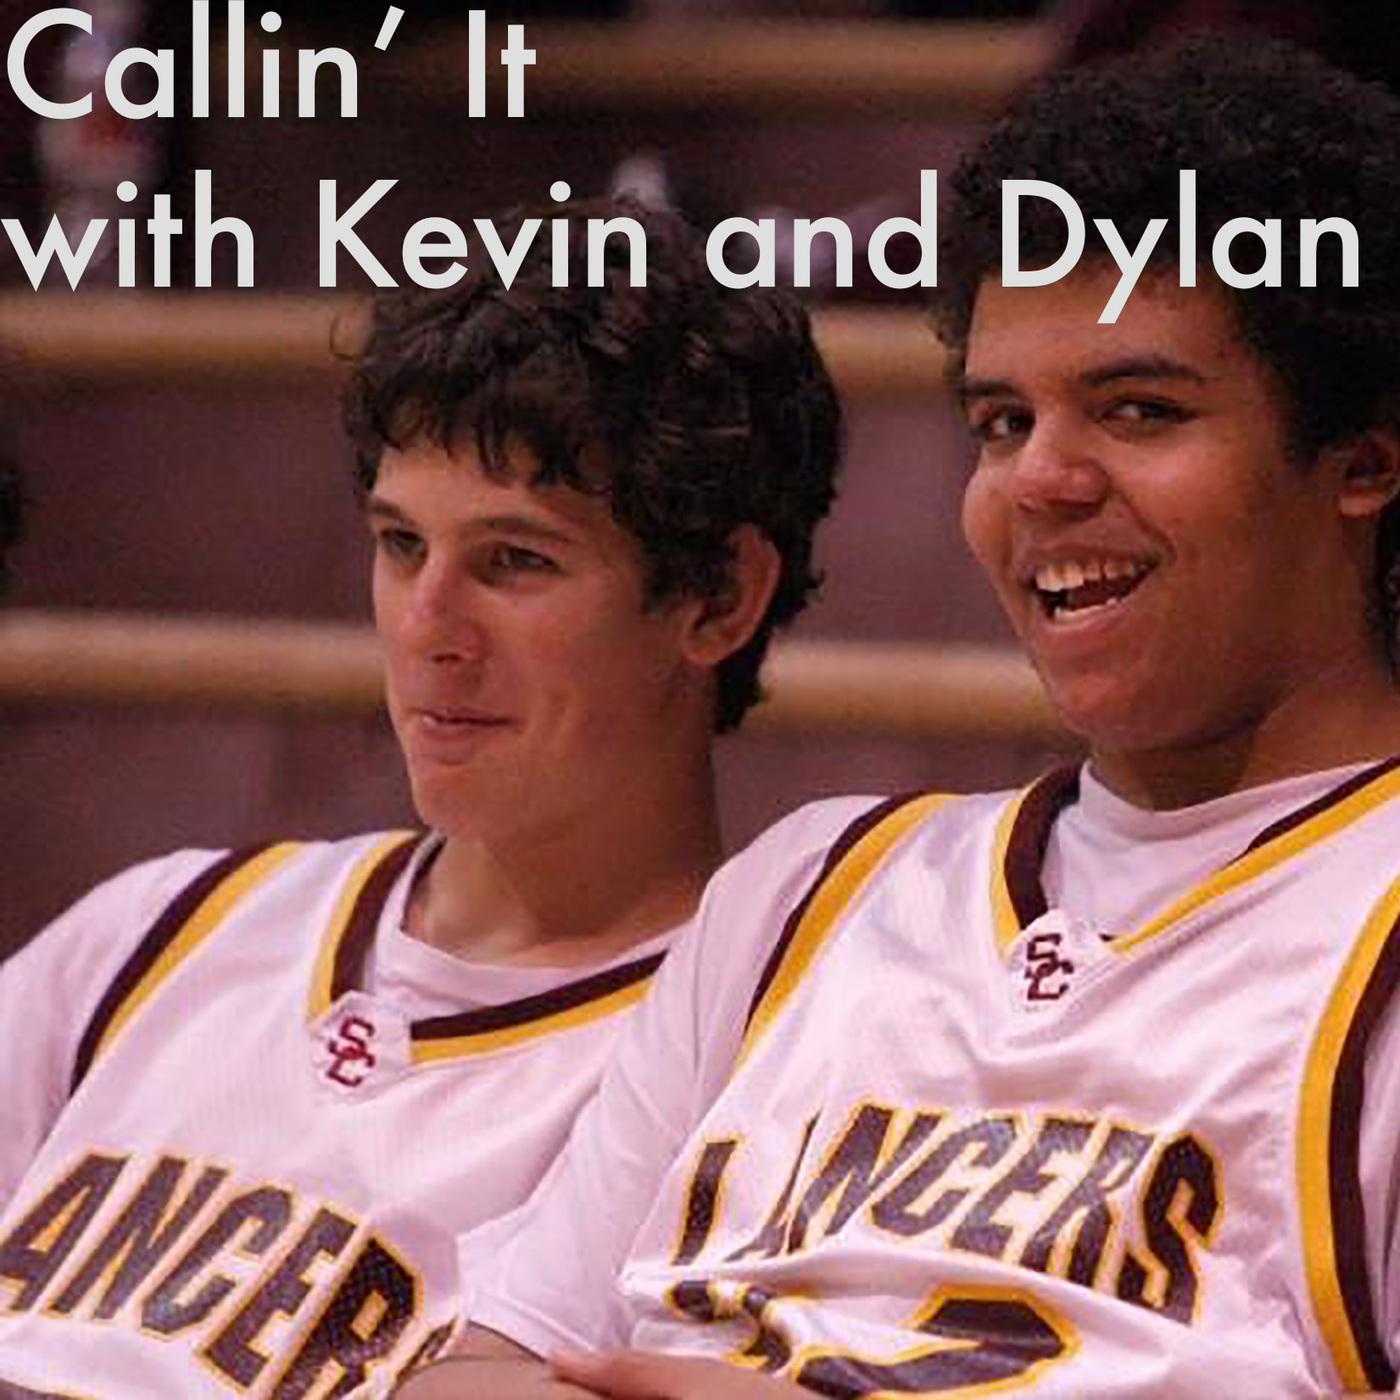 Callin' It with Kevin and Dylan